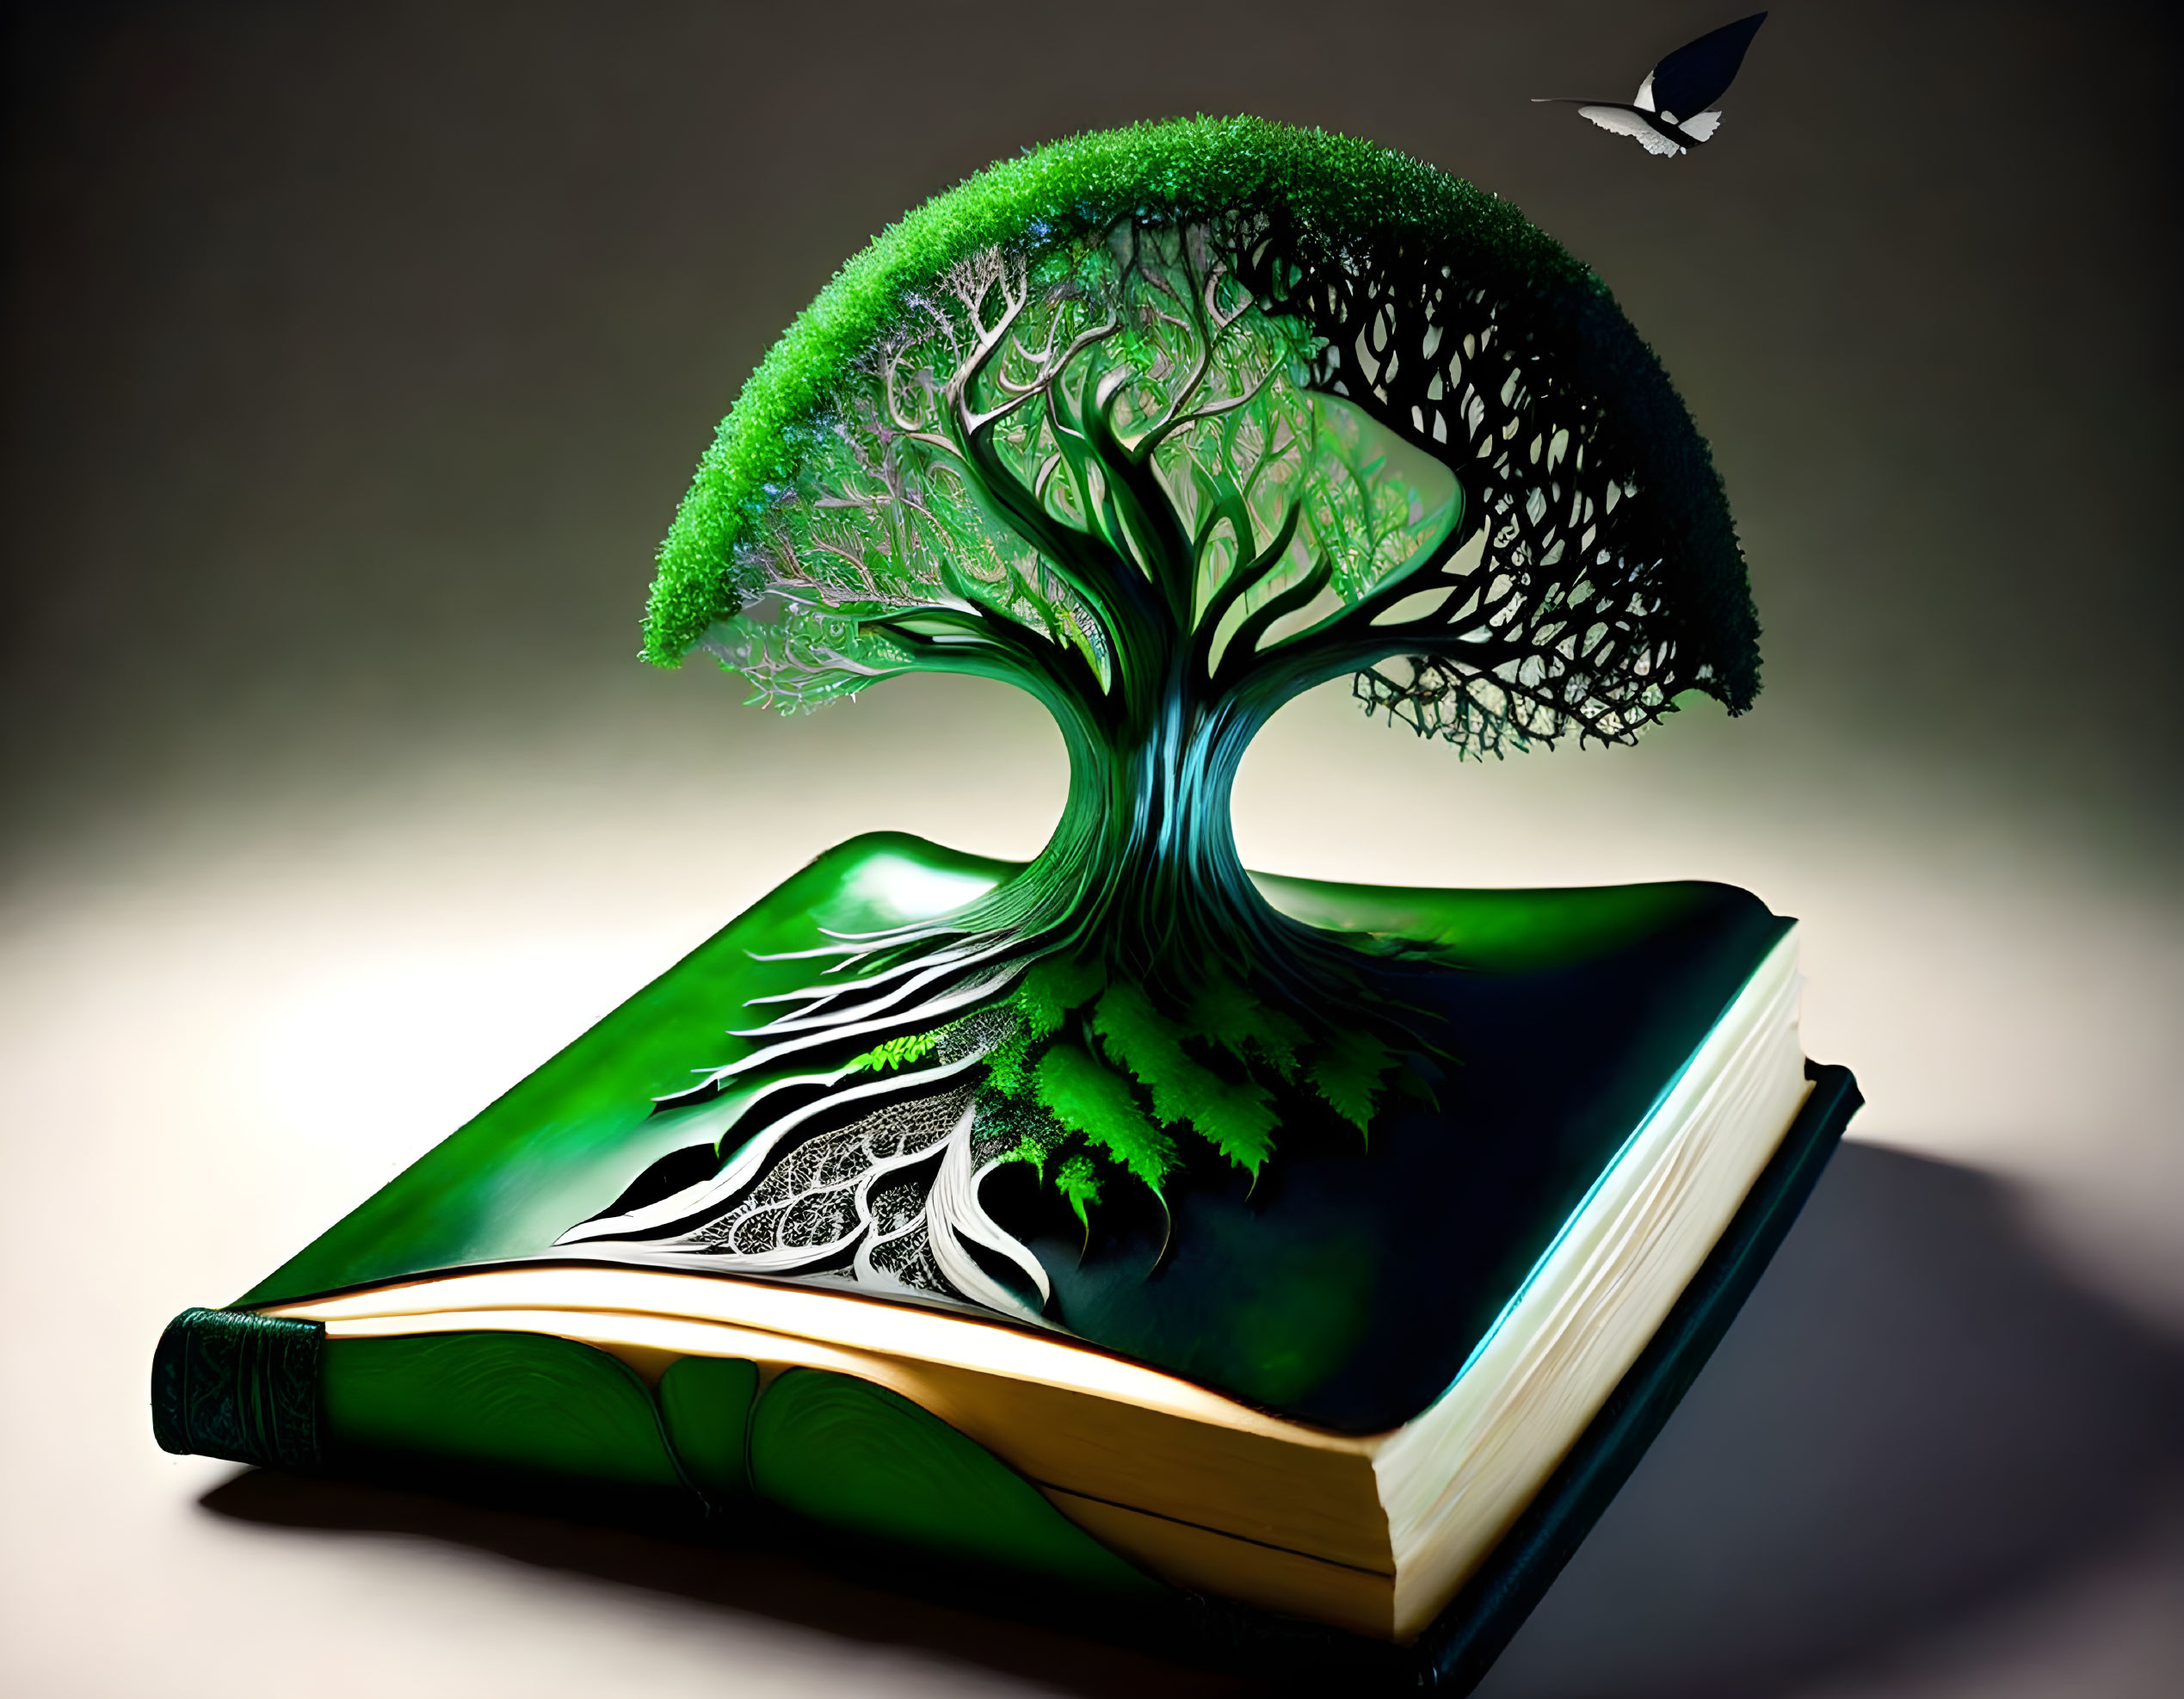 Illustrated book with lush tree, intricate roots, and butterfly illustration